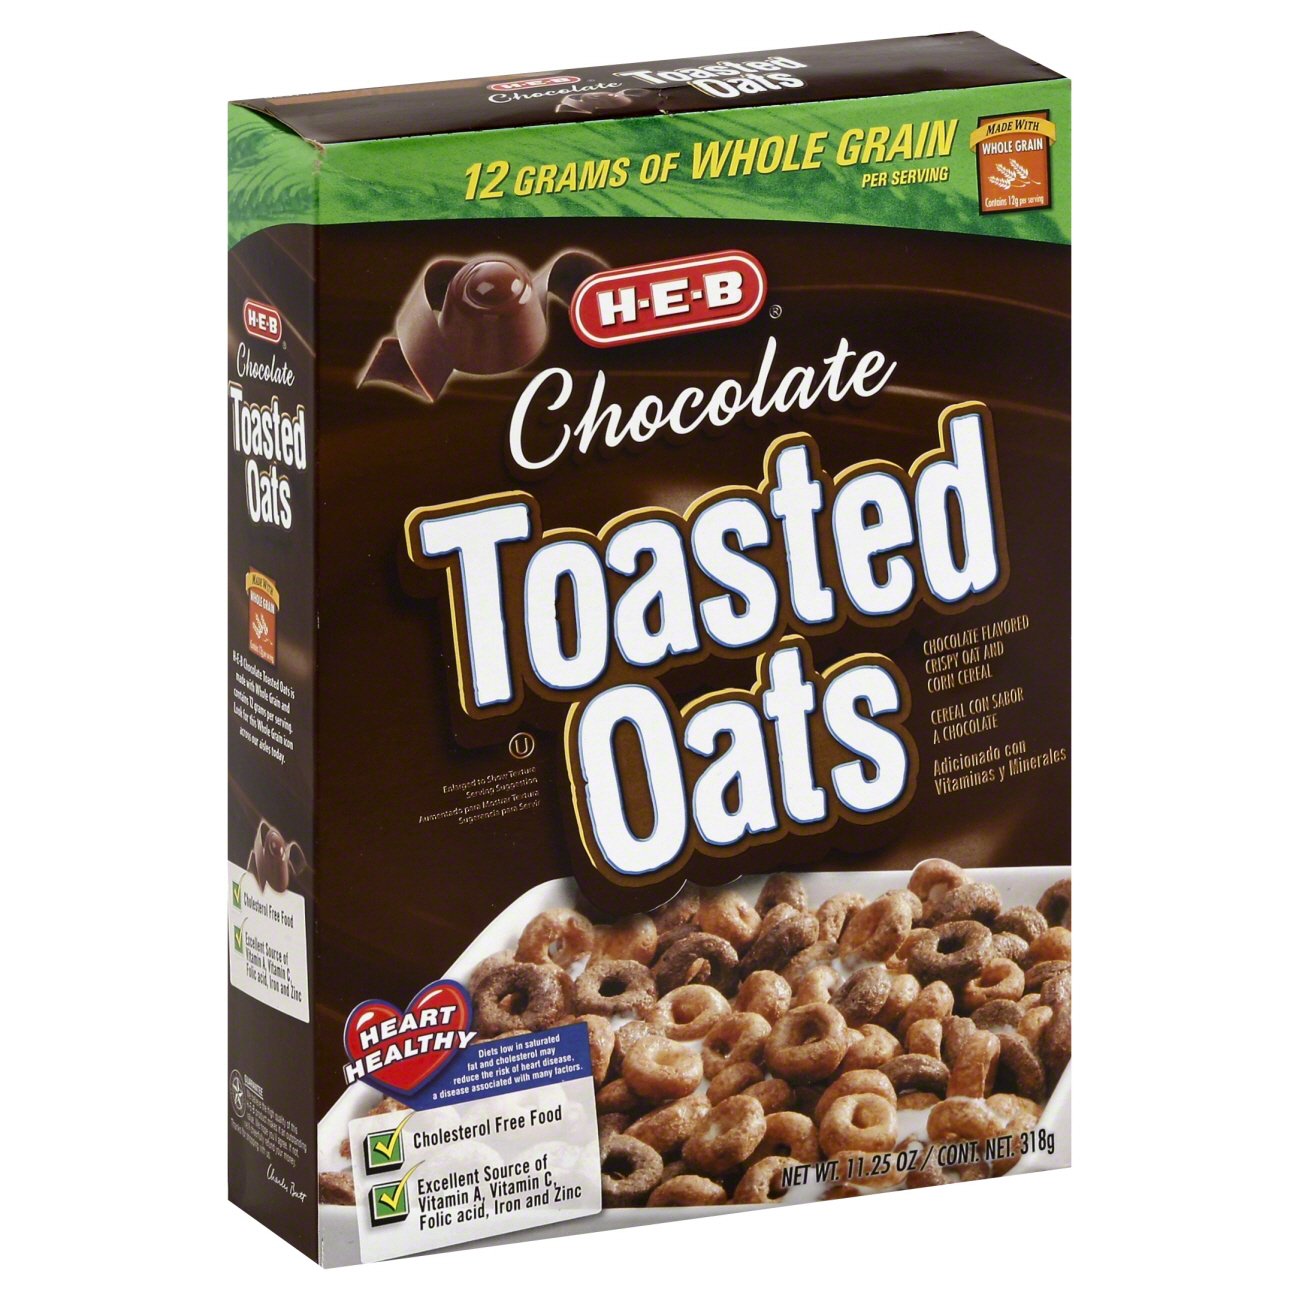 Hill Country Fare Honey & Nut Toasted O's Cereal - Shop Cereal at H-E-B